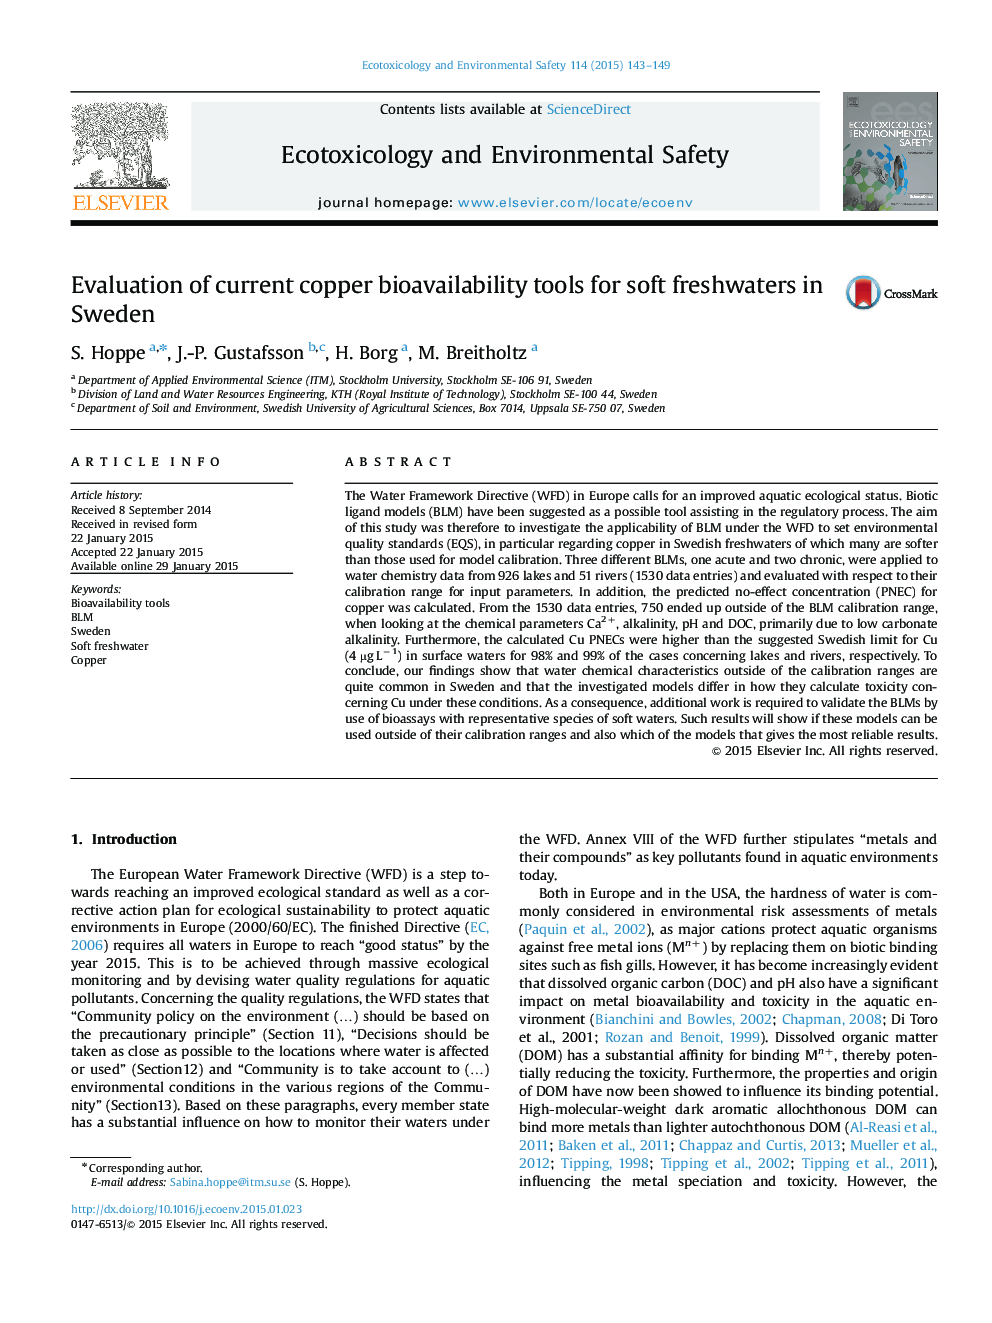 Evaluation of current copper bioavailability tools for soft freshwaters in Sweden